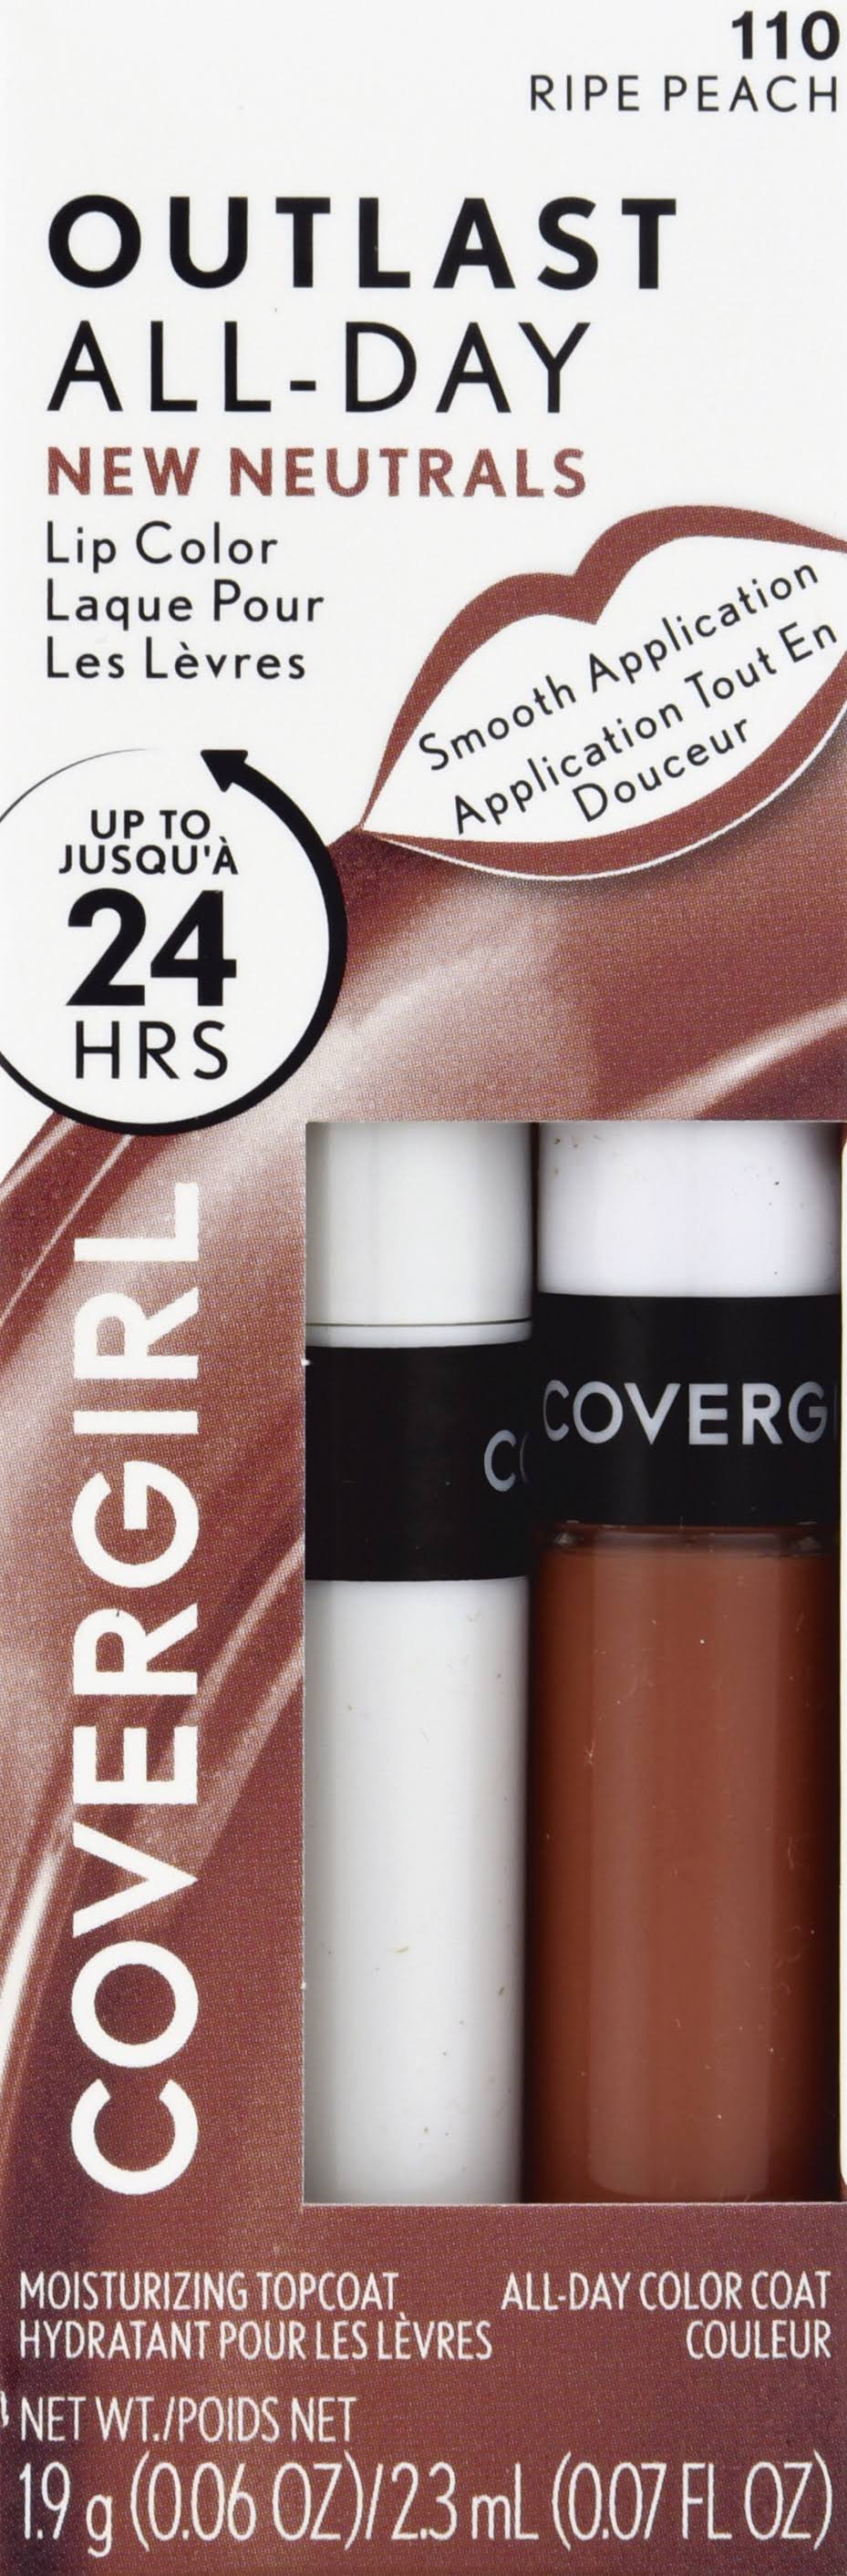 Covergirl Outlast All-Day Lip Color with Moisturizing Topcoat, New Neu